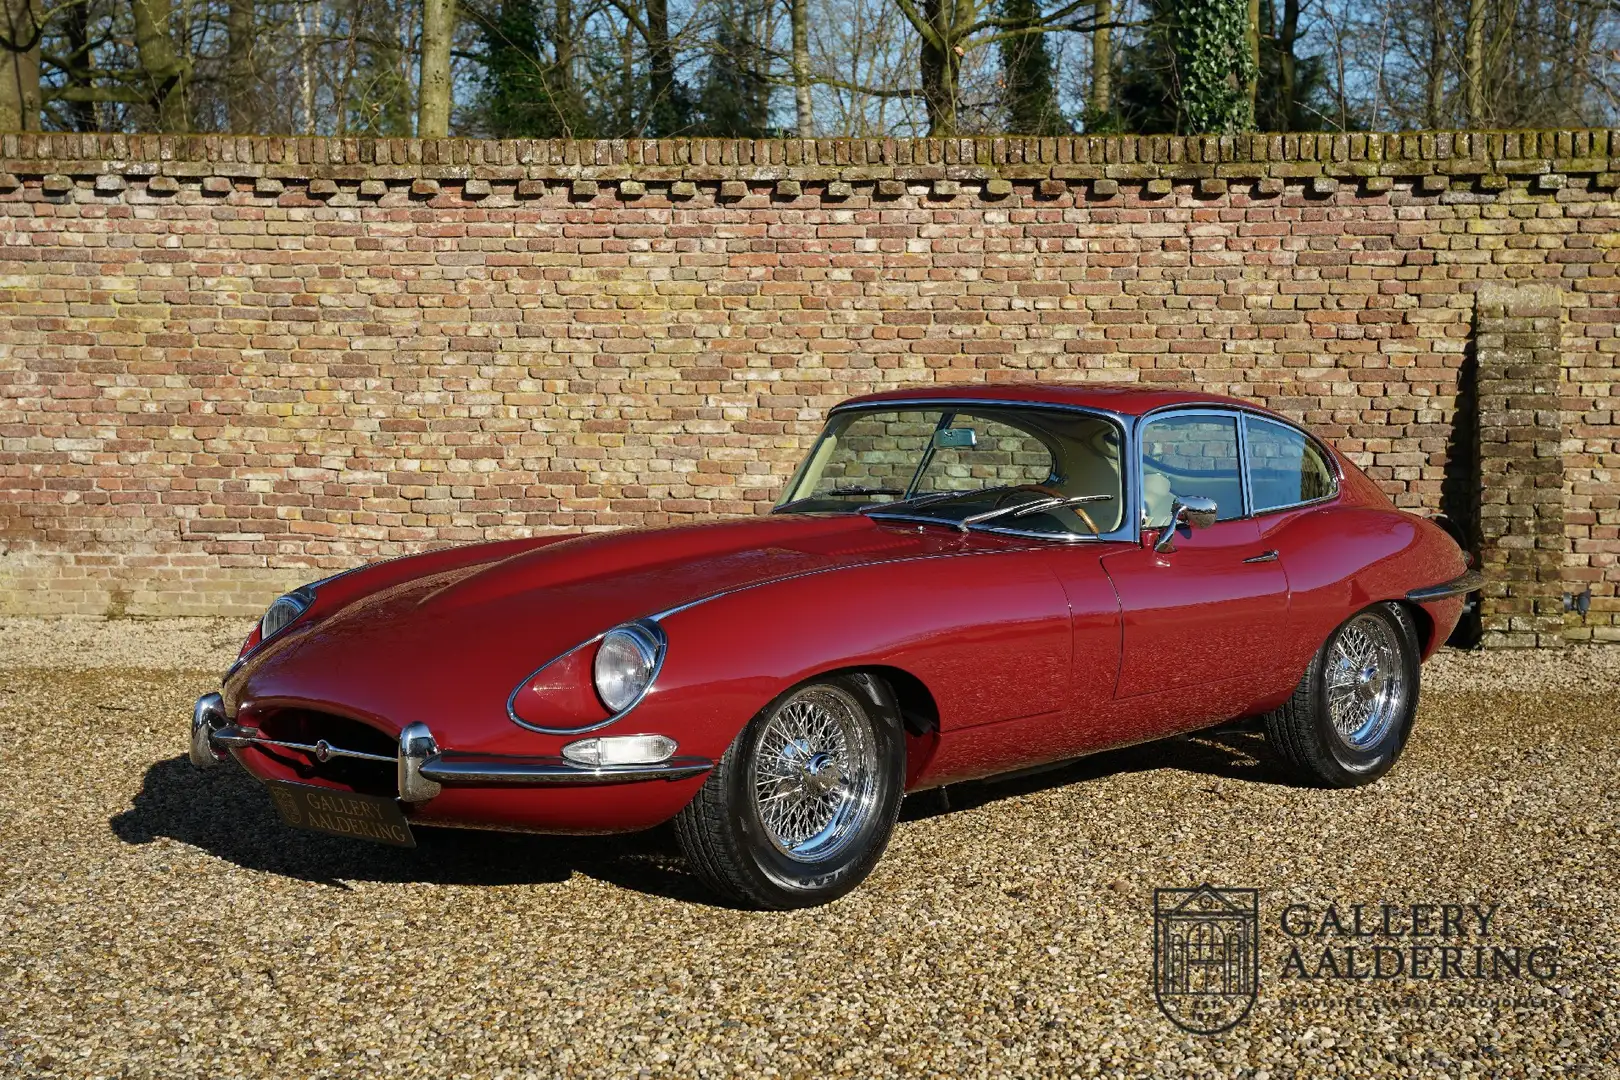 Jaguar E-Type 4.2 coupe series 1.5 Superb restored condition, Ma Rood - 1